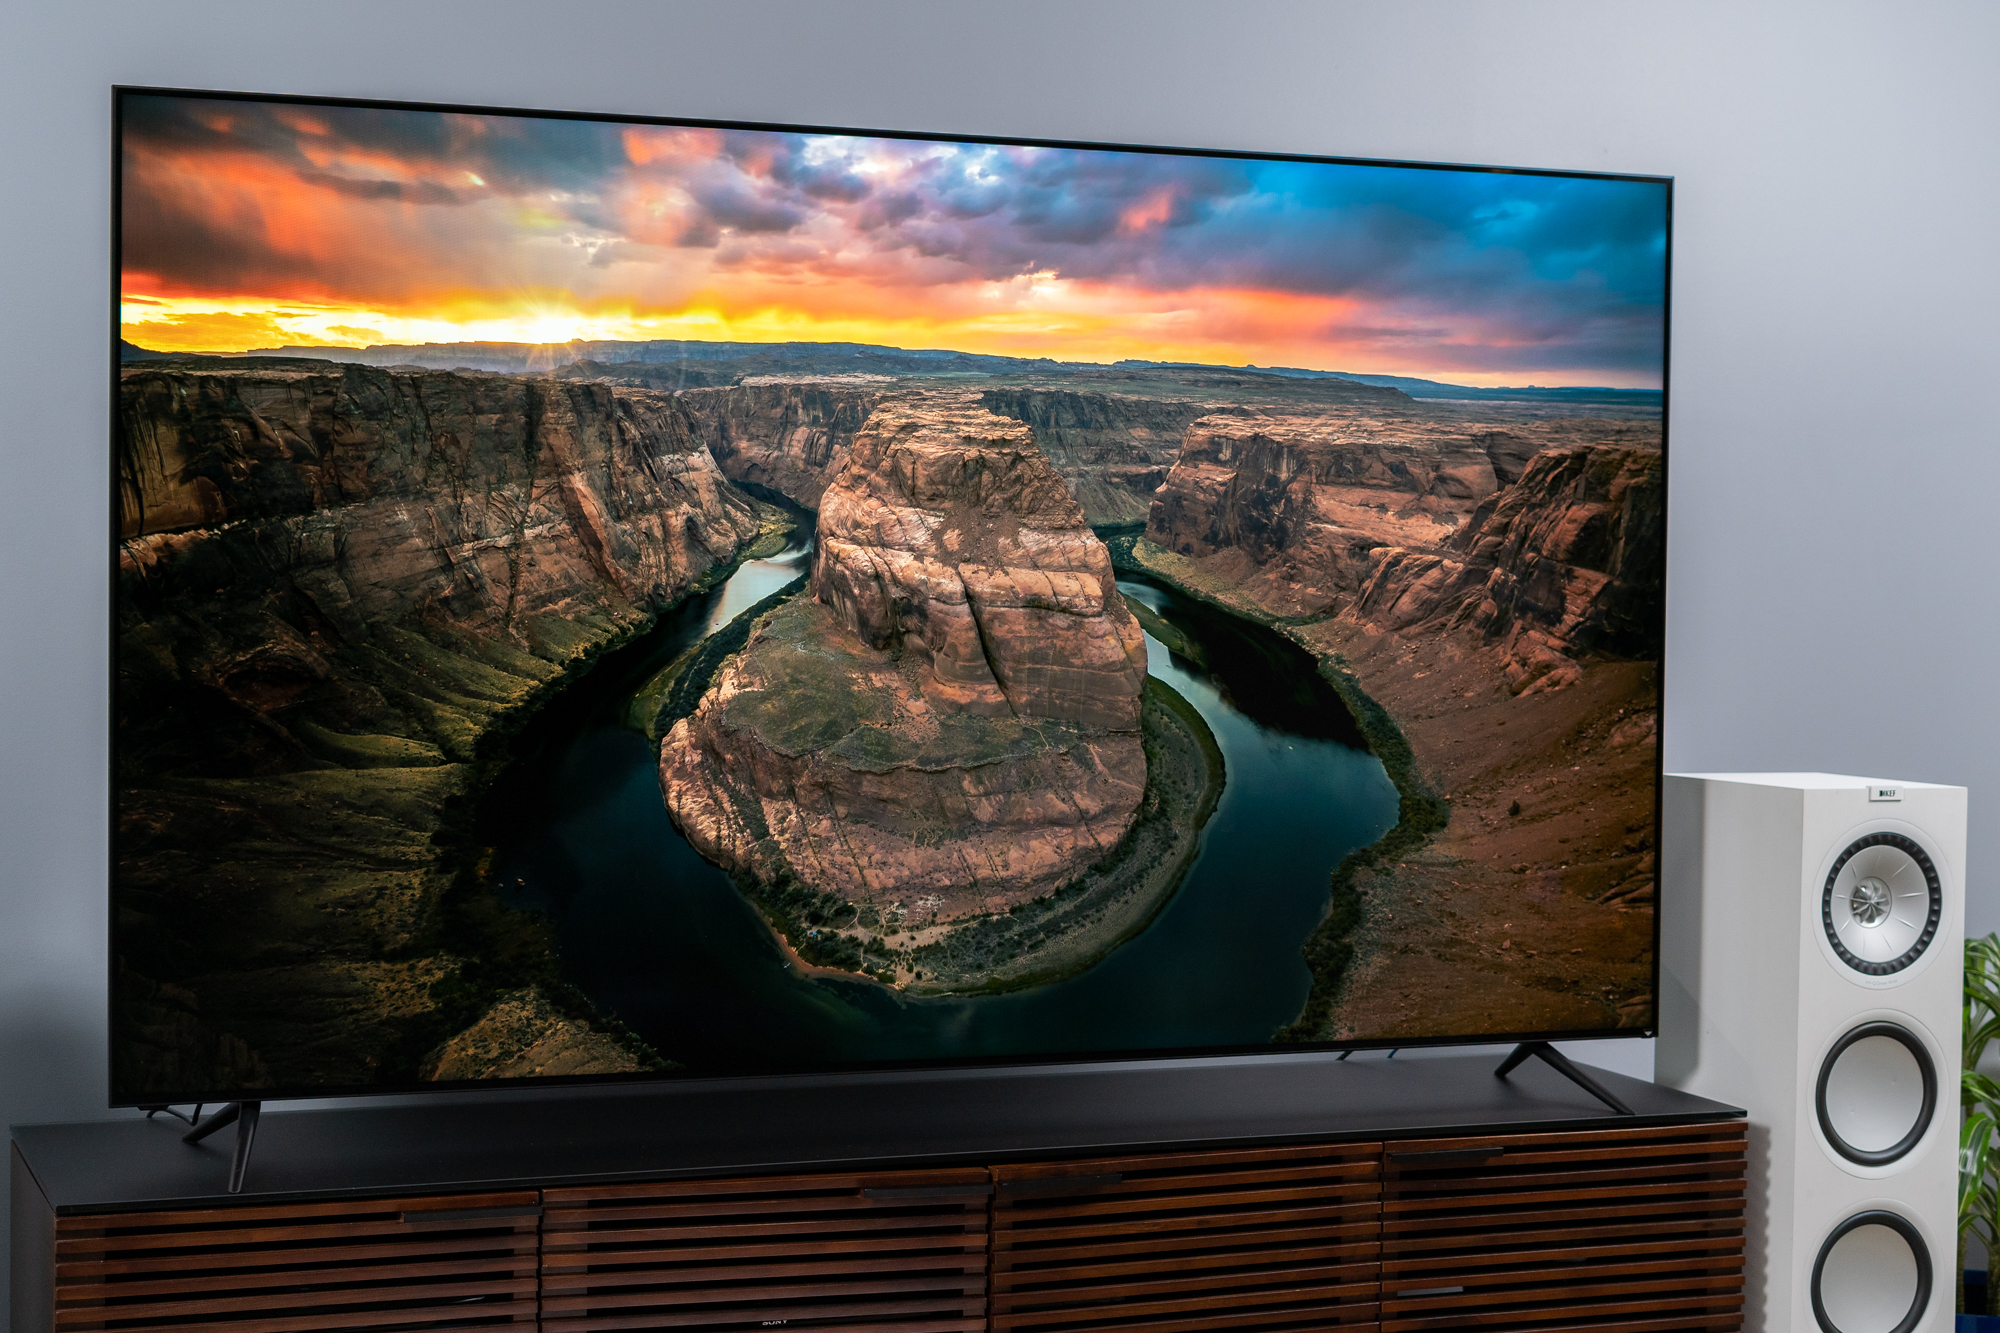 Samsung Q900 smart TV review: This 8K TV will make you forget all about 4K